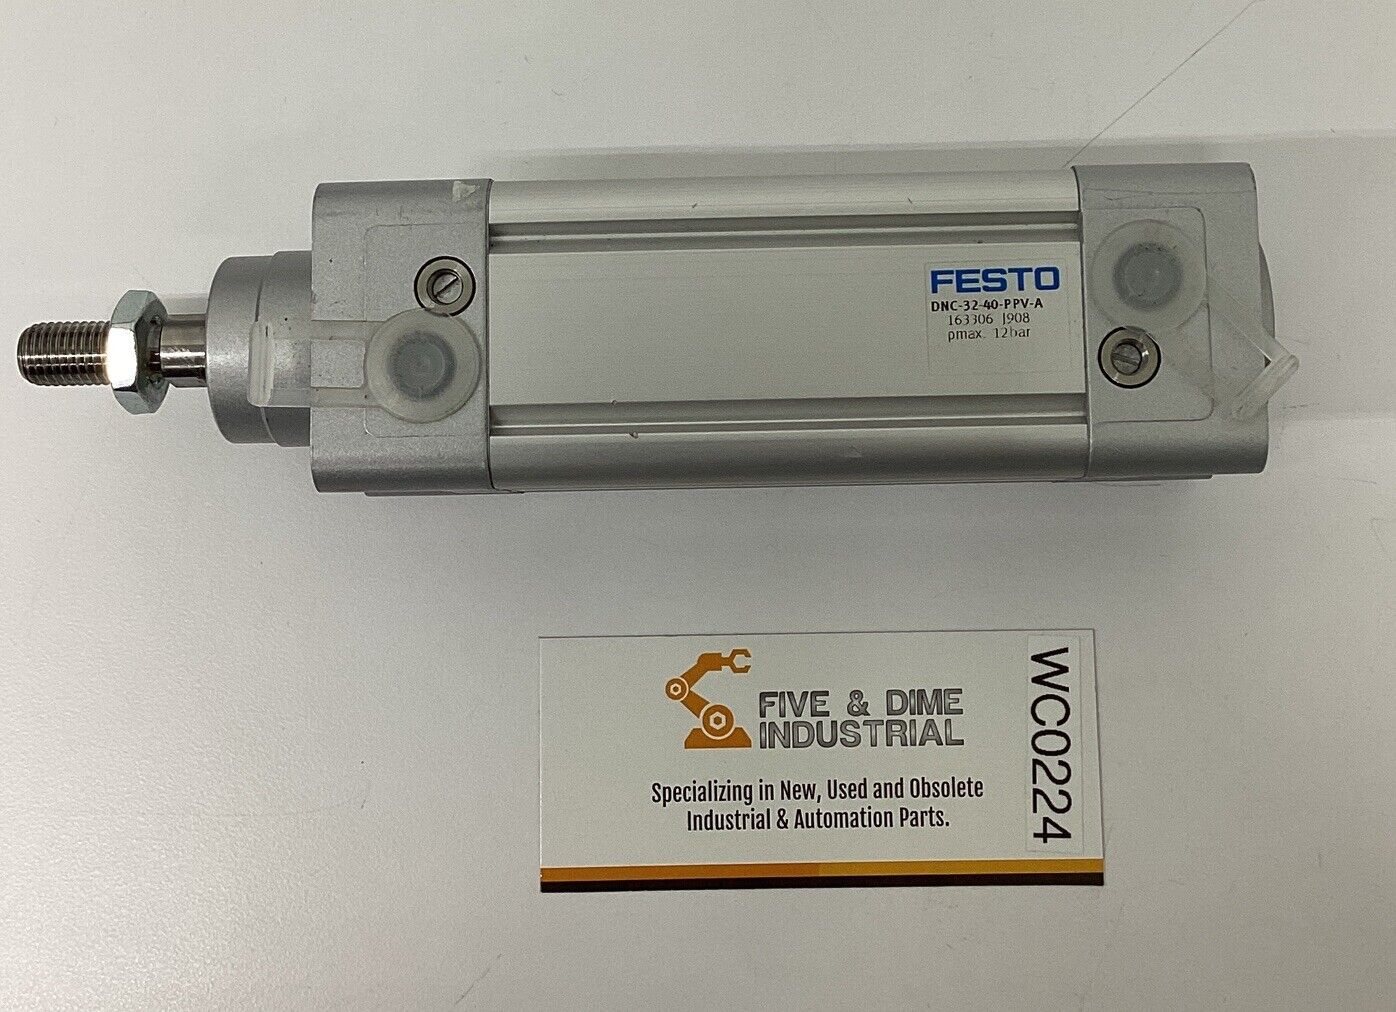 Festo DNC-32-40-PPV-A / 163306 Double Acting Cylinder 32mm 40mm Stroke (BL271)